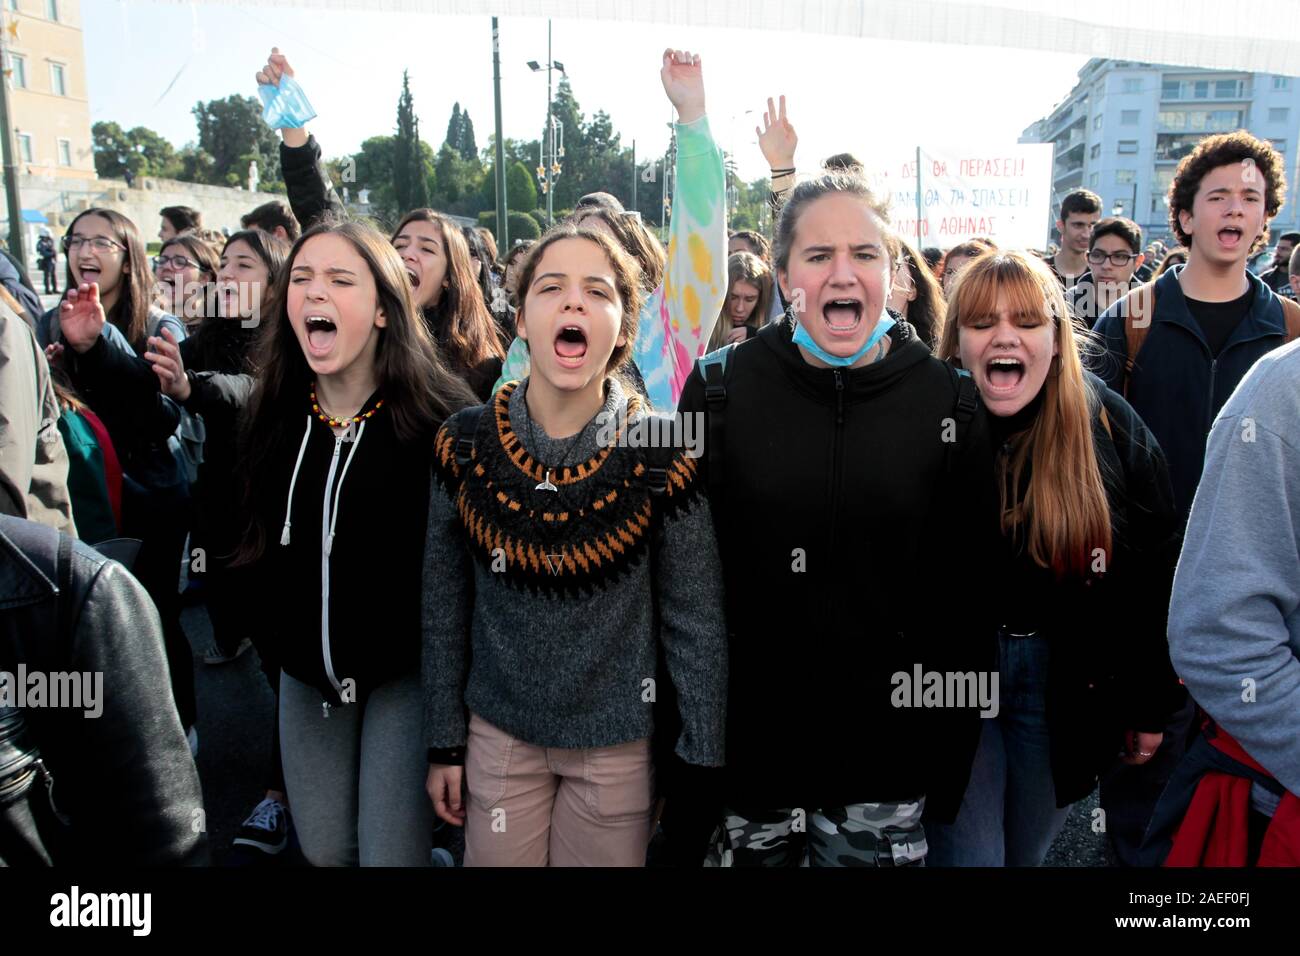 Students take part in a rally   during the anniversary of the police's fatal shooting of a teenage boy that caused extensive rioting in 2008. Stock Photo